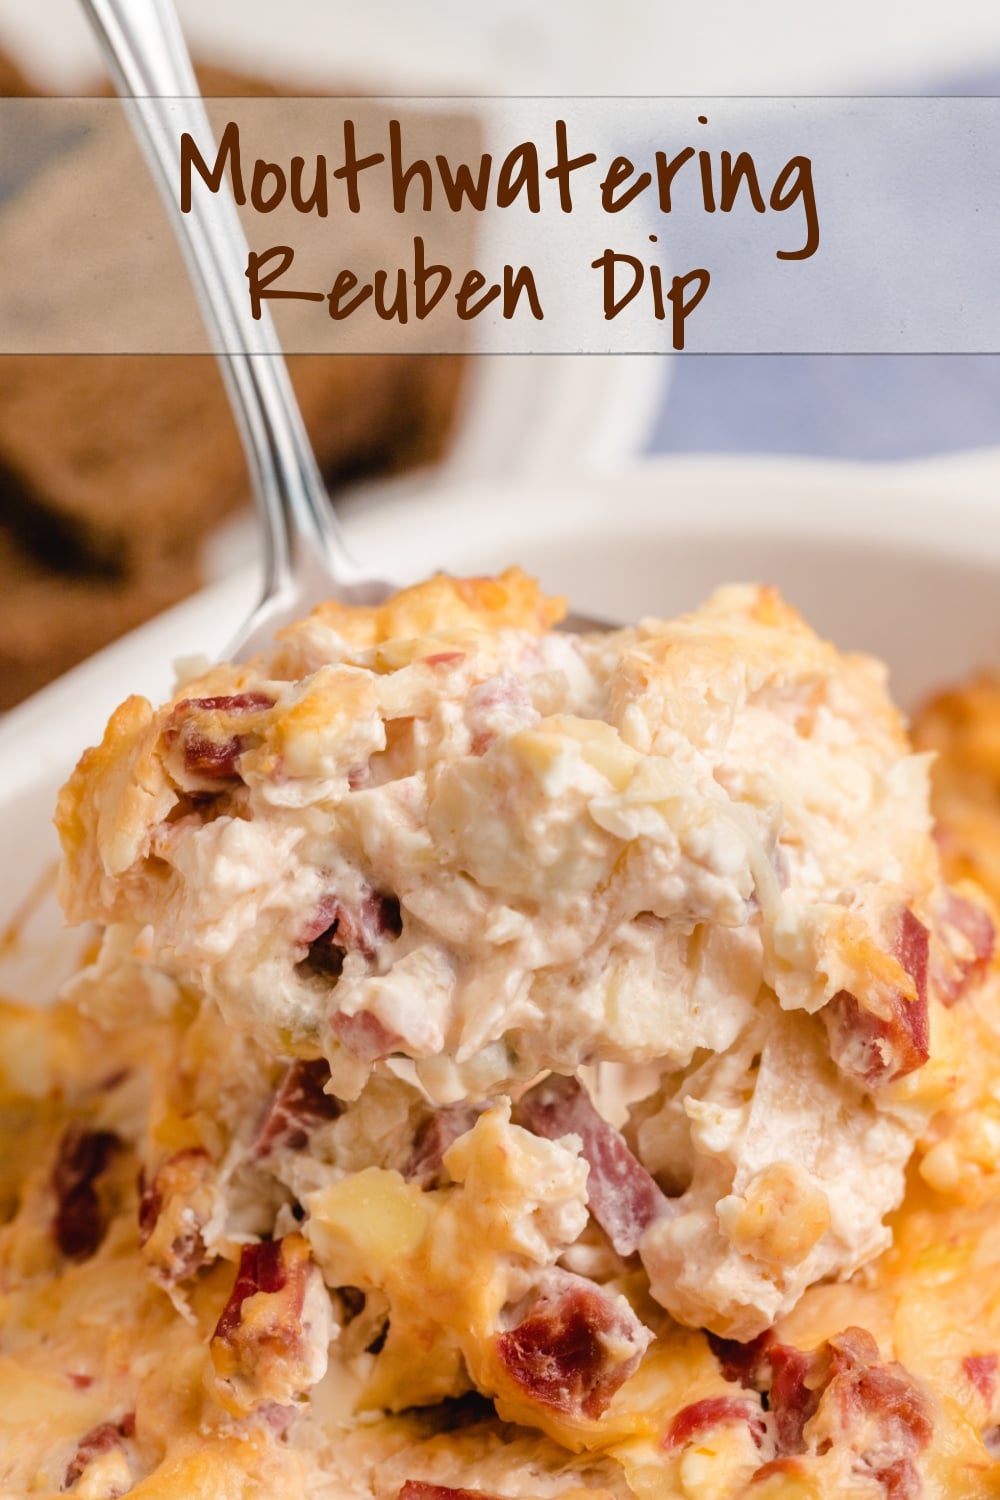 Hot and cheesy Reuben Dip has all the flavors of a favorite diner sandwich - corned beef, sharp and crunchy sauerkraut, Swiss cheese and sweet and tangy condiment base. Scoop it up with slices of rye, pumpernickel or your favorite white bread.   via @cmpollak1